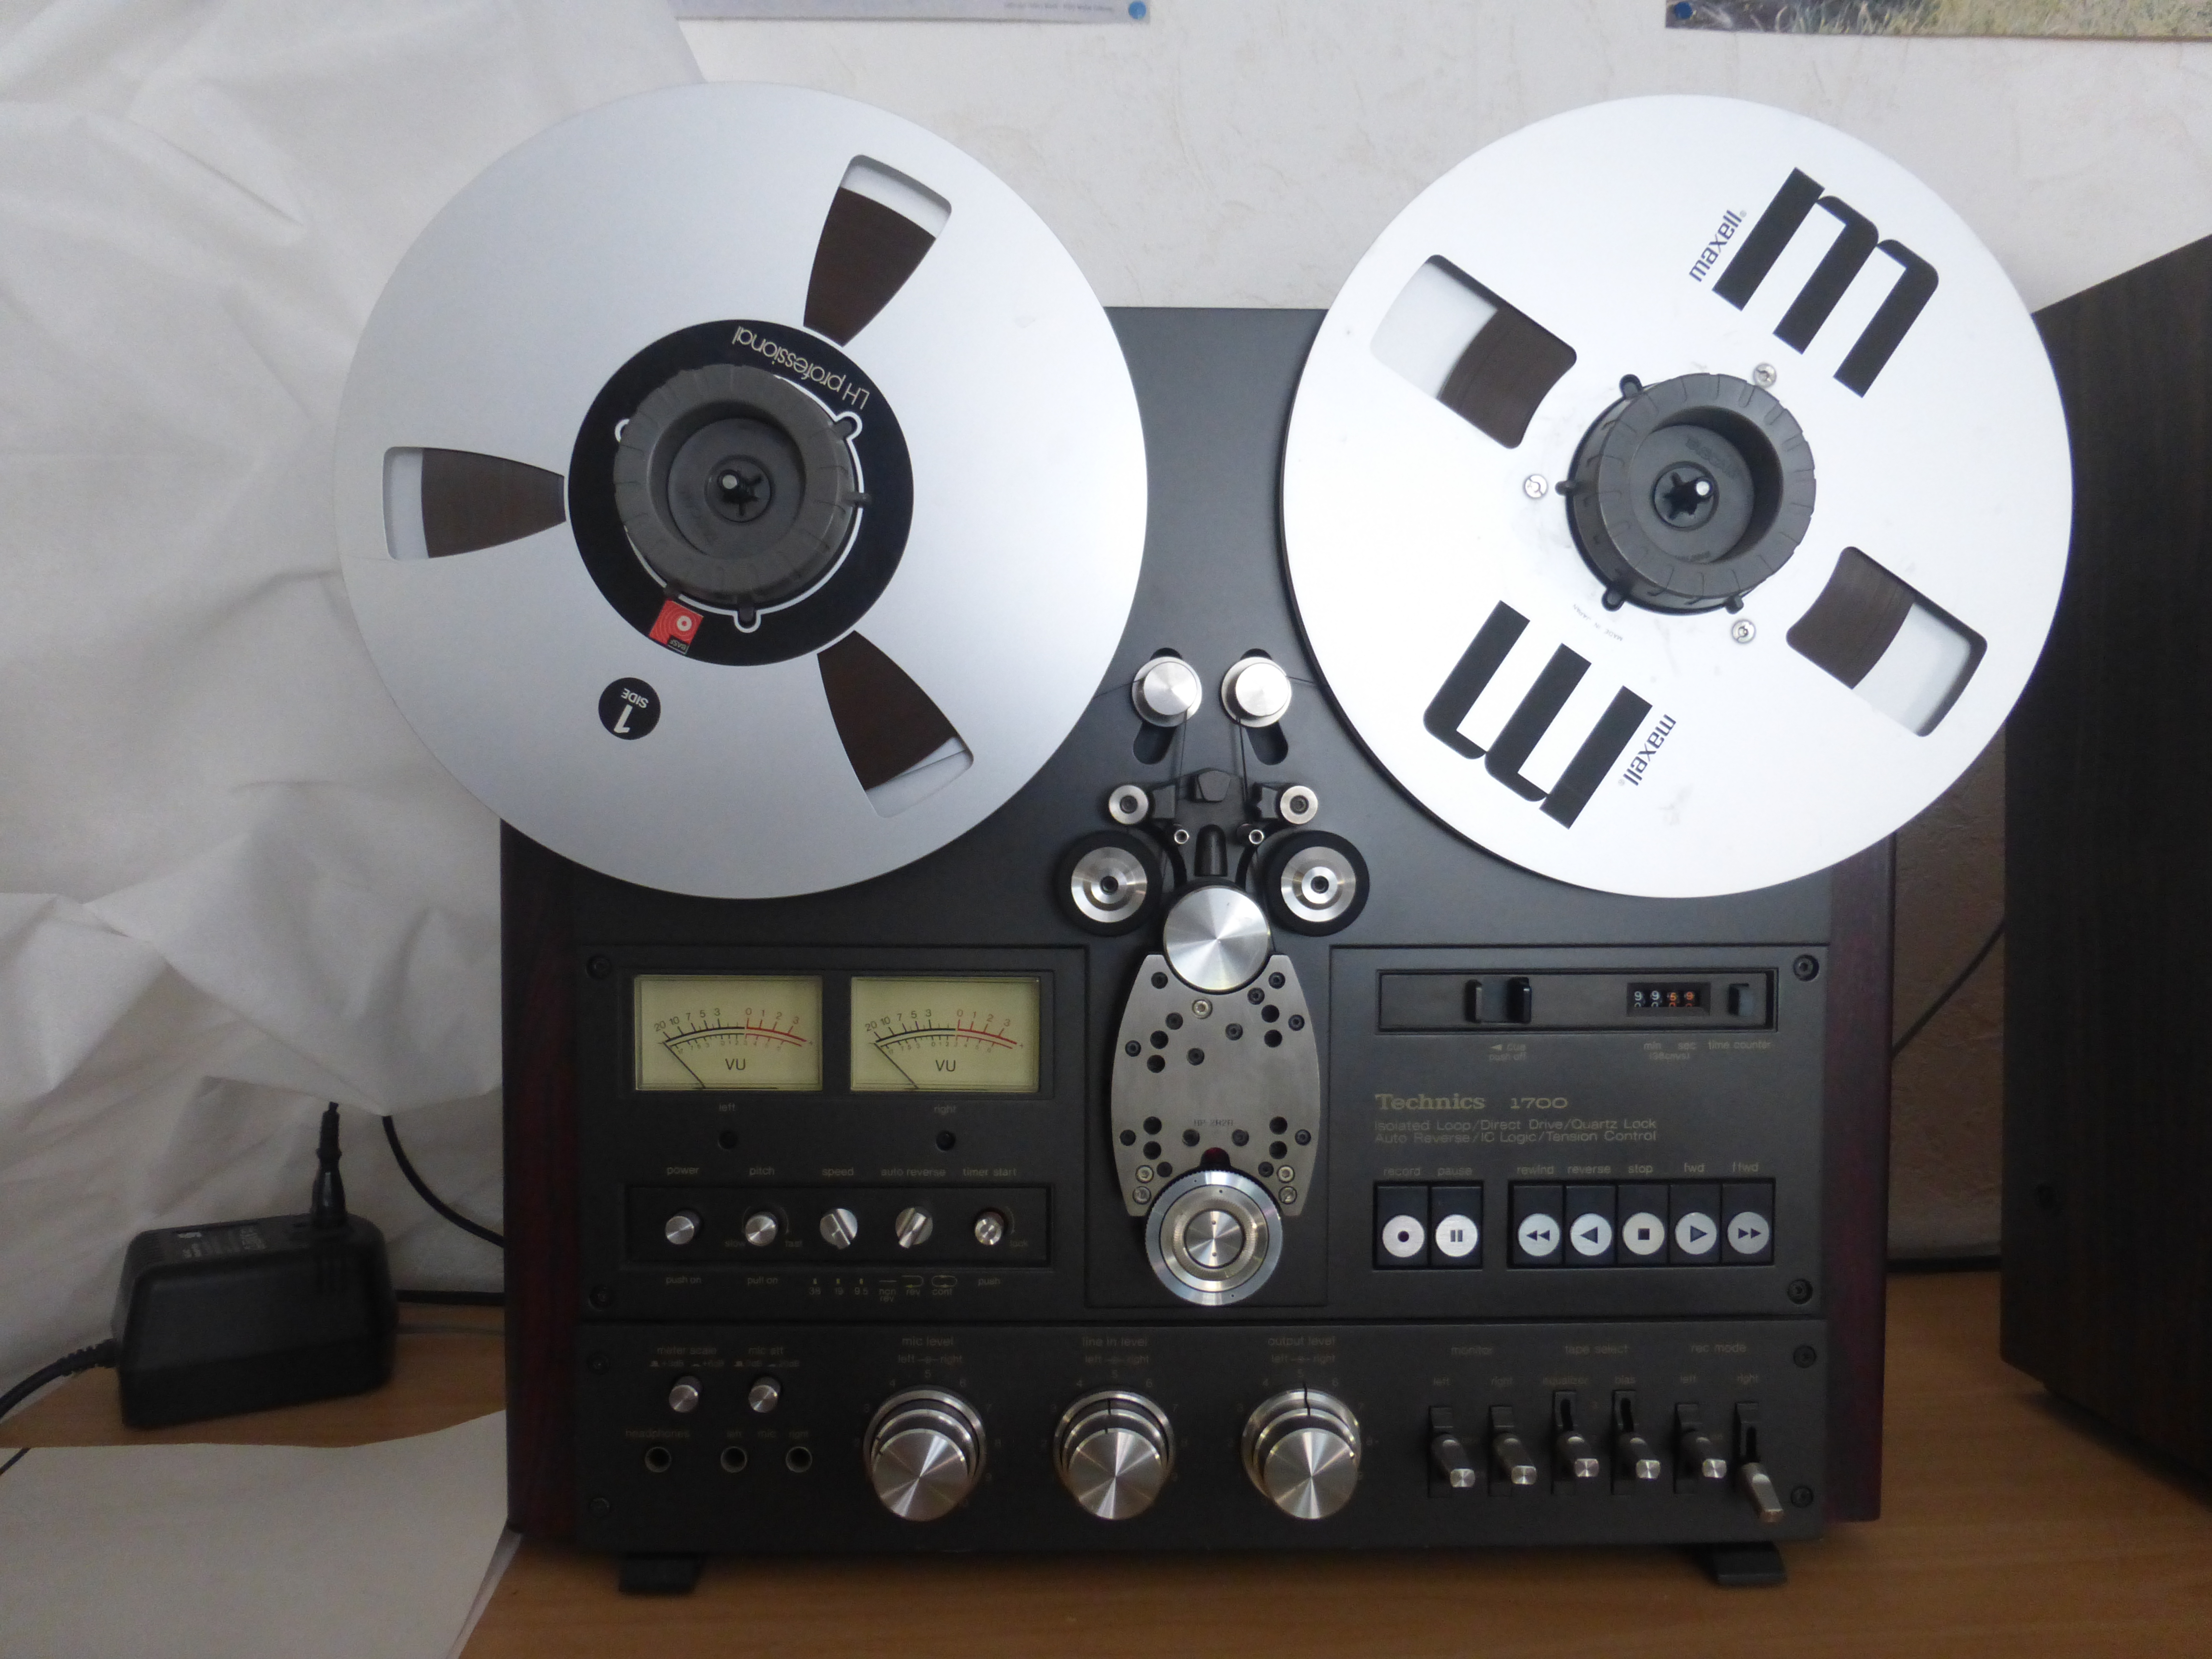 FOR SALE. Tandberg TD20A Reel to Reel tape recorder